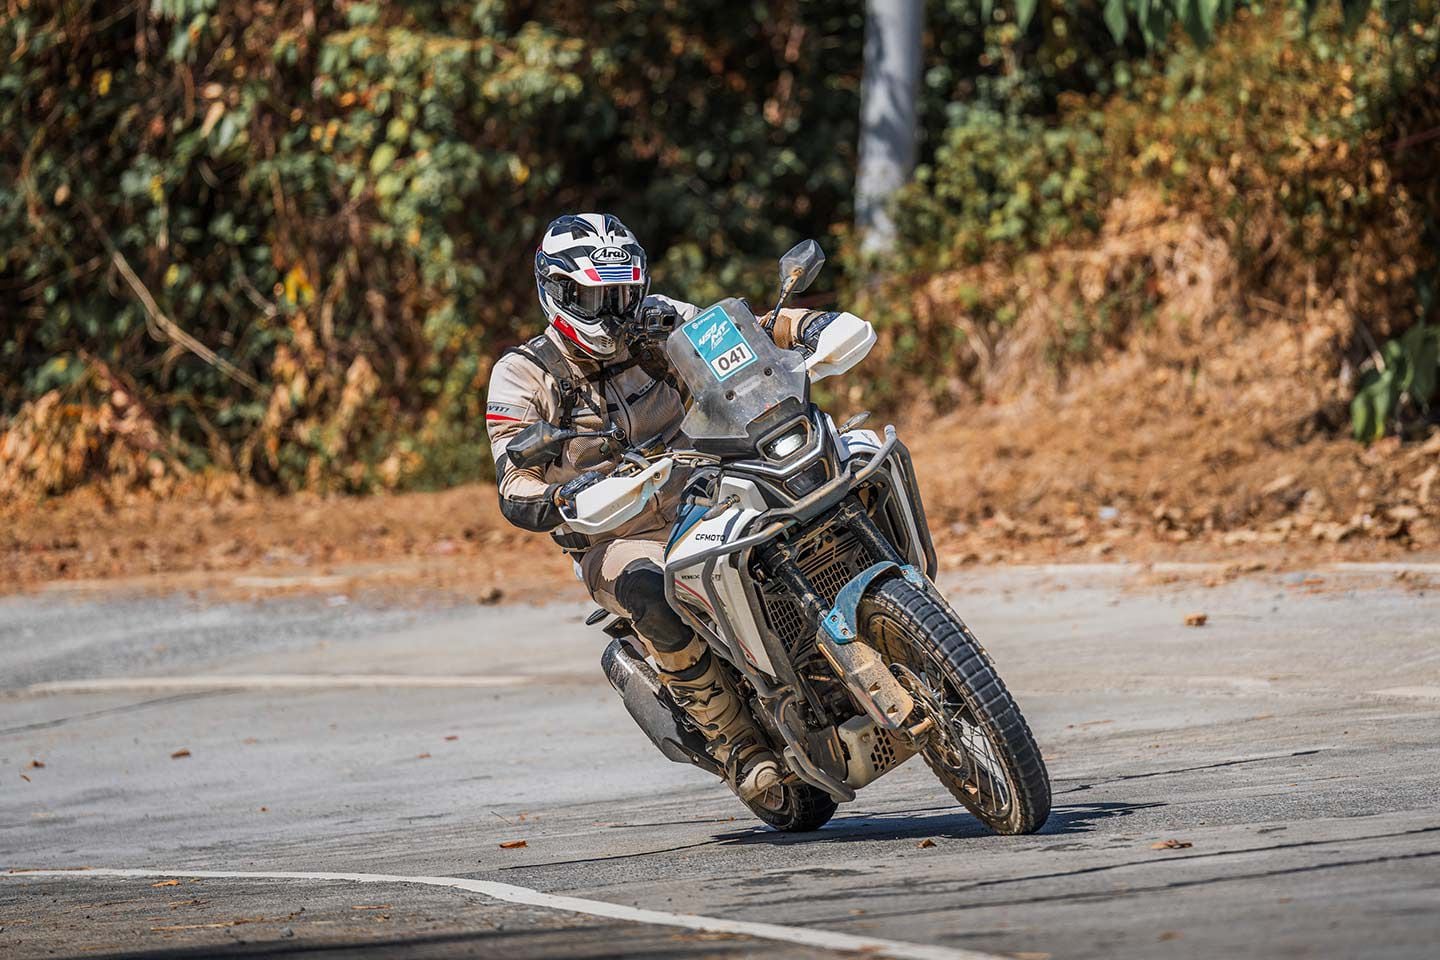 While the bike is lightweight, stock suspension keeps the Ibex 450 from being really fun on the pavement.